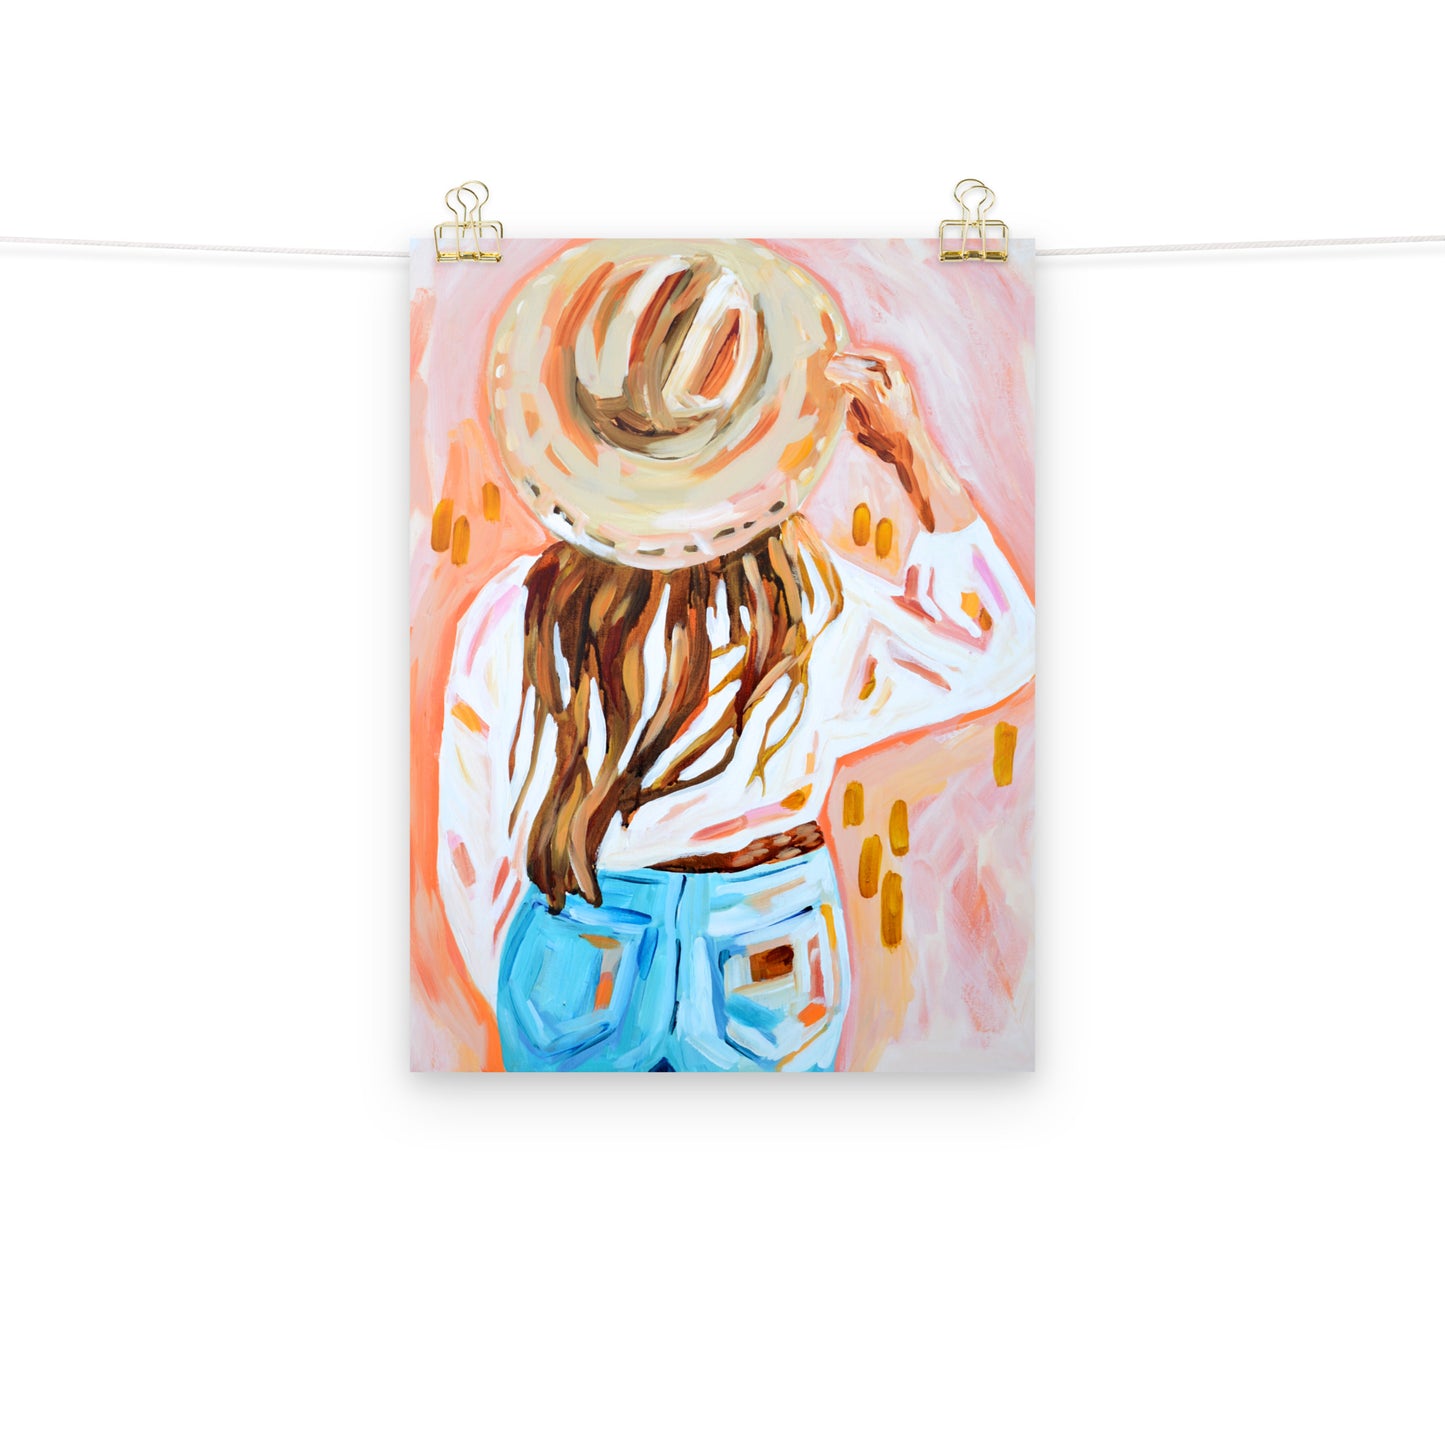 Cowgirl Western Archival Art Print with Cowboy Hat and Rodeo Queen Painting